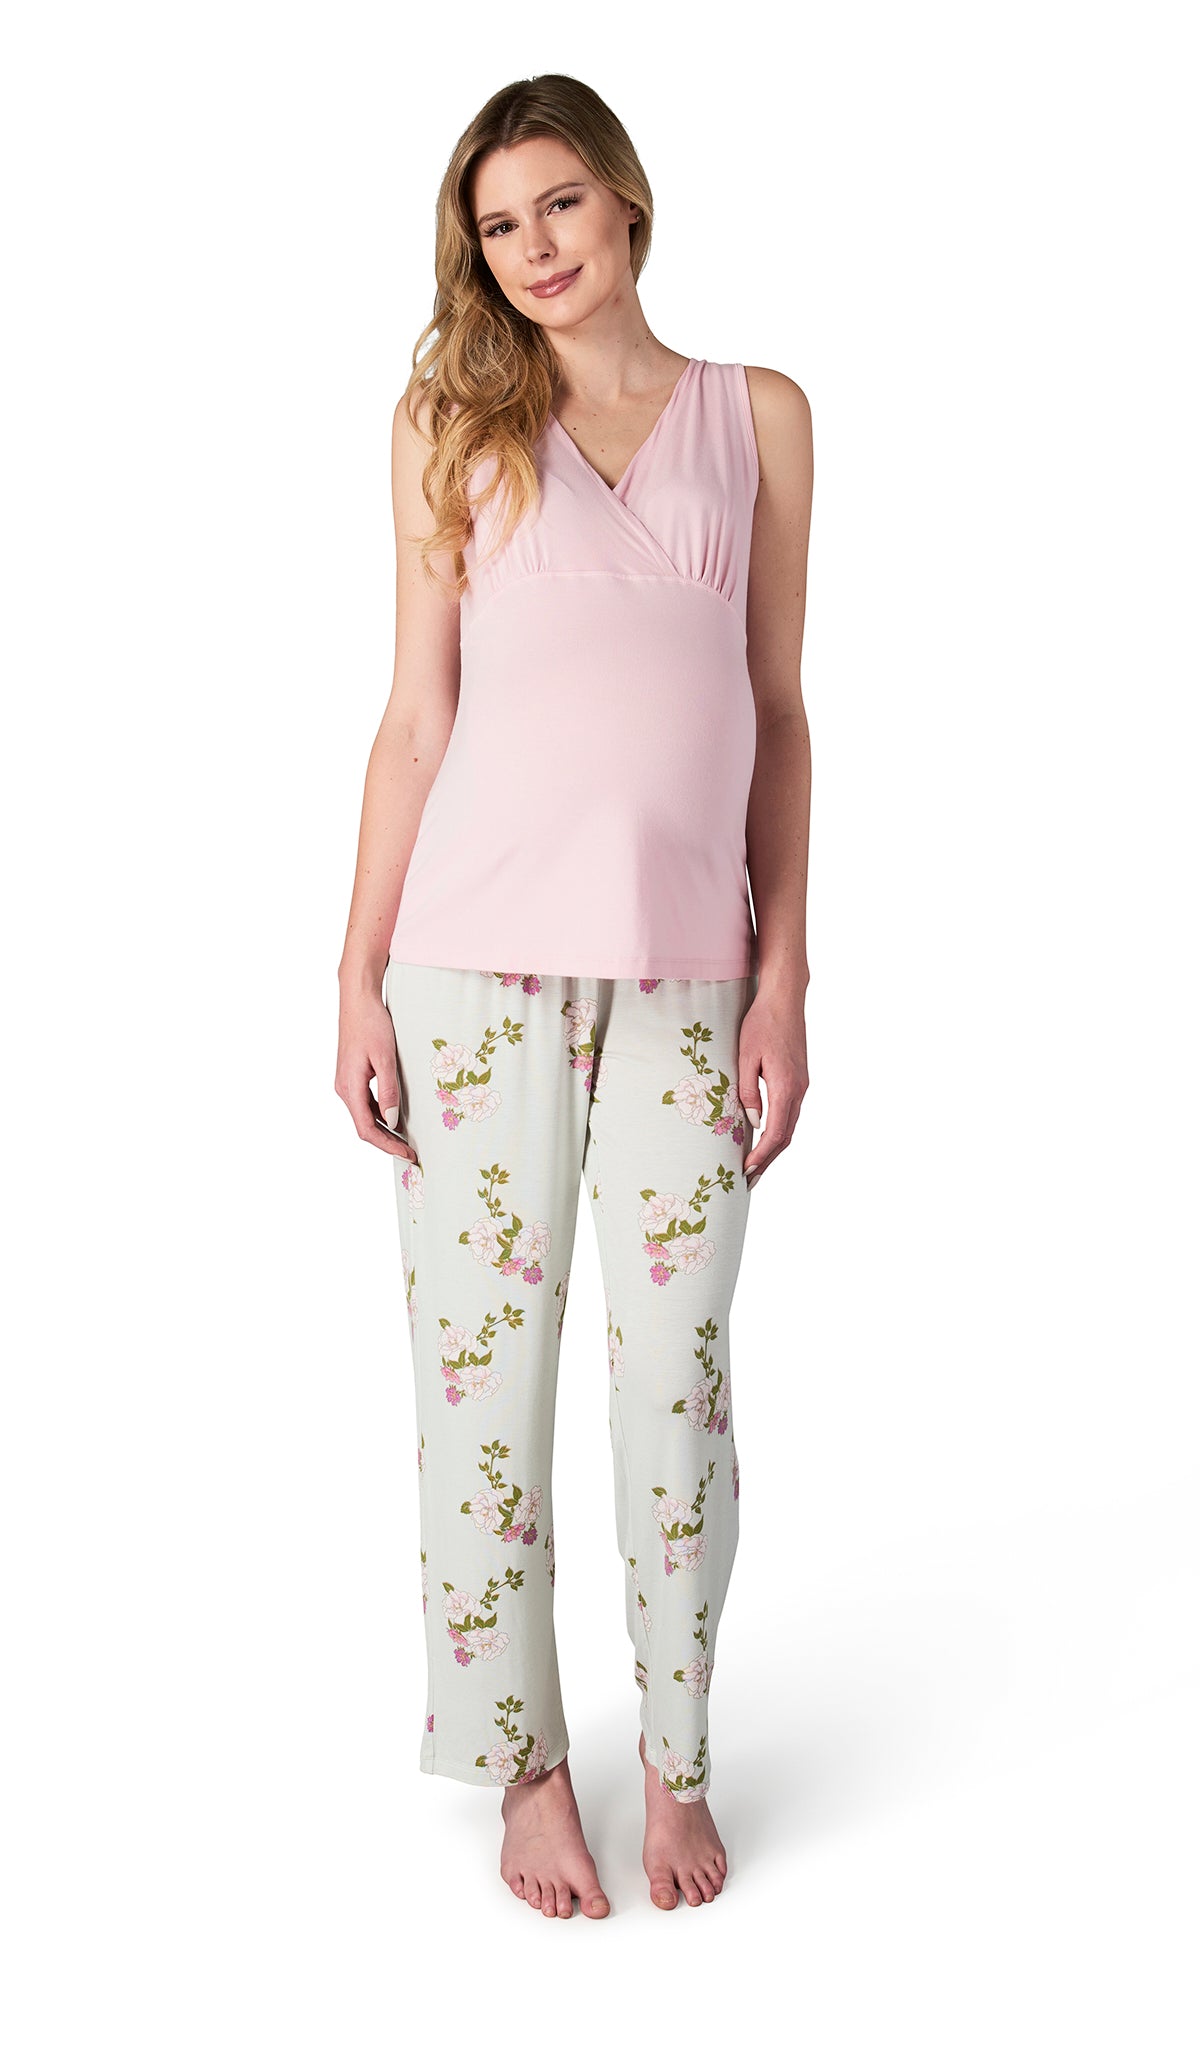 Peony Analise 5-Piece Set, pregnant woman wearing criss-cross bust tank top and pant.